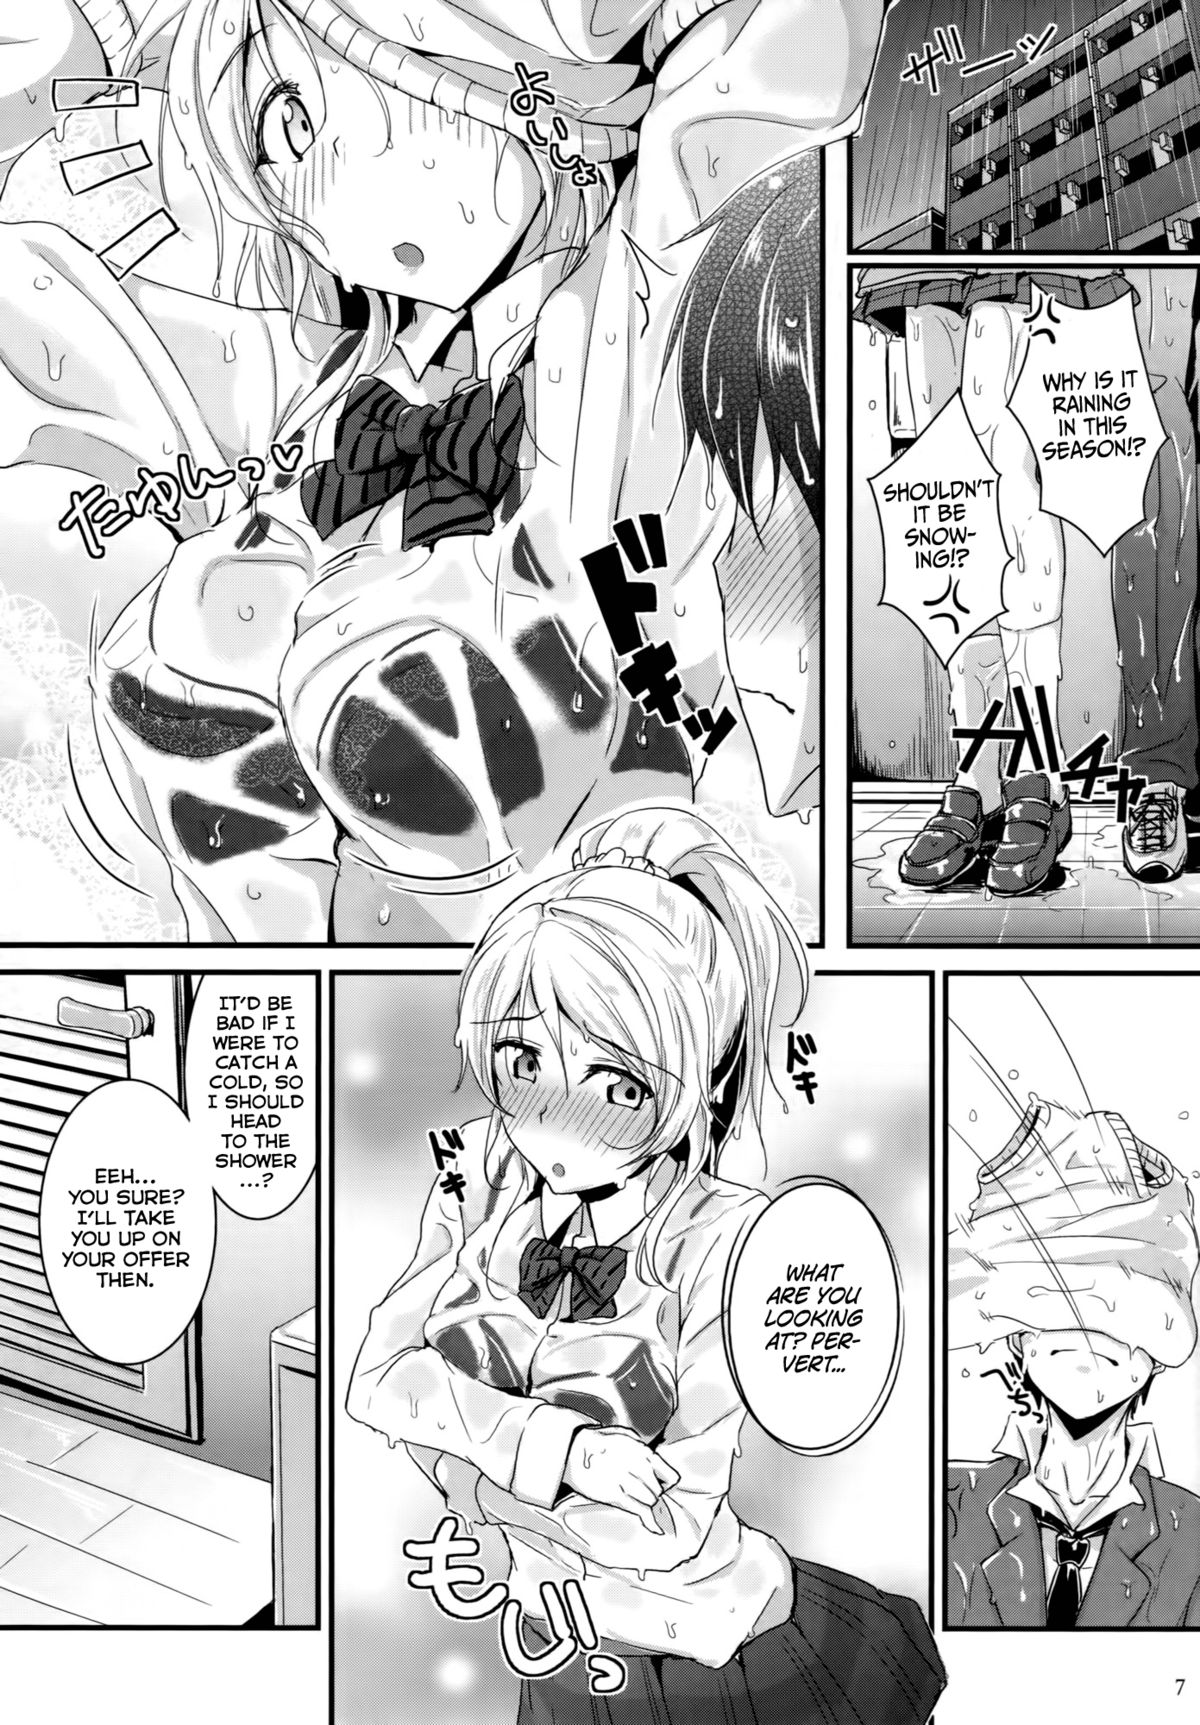 (C87) [Nuno no Ie (Moonlight)] Let's Study××× 5 (Love Live!) [English] [Facedesk] page 6 full